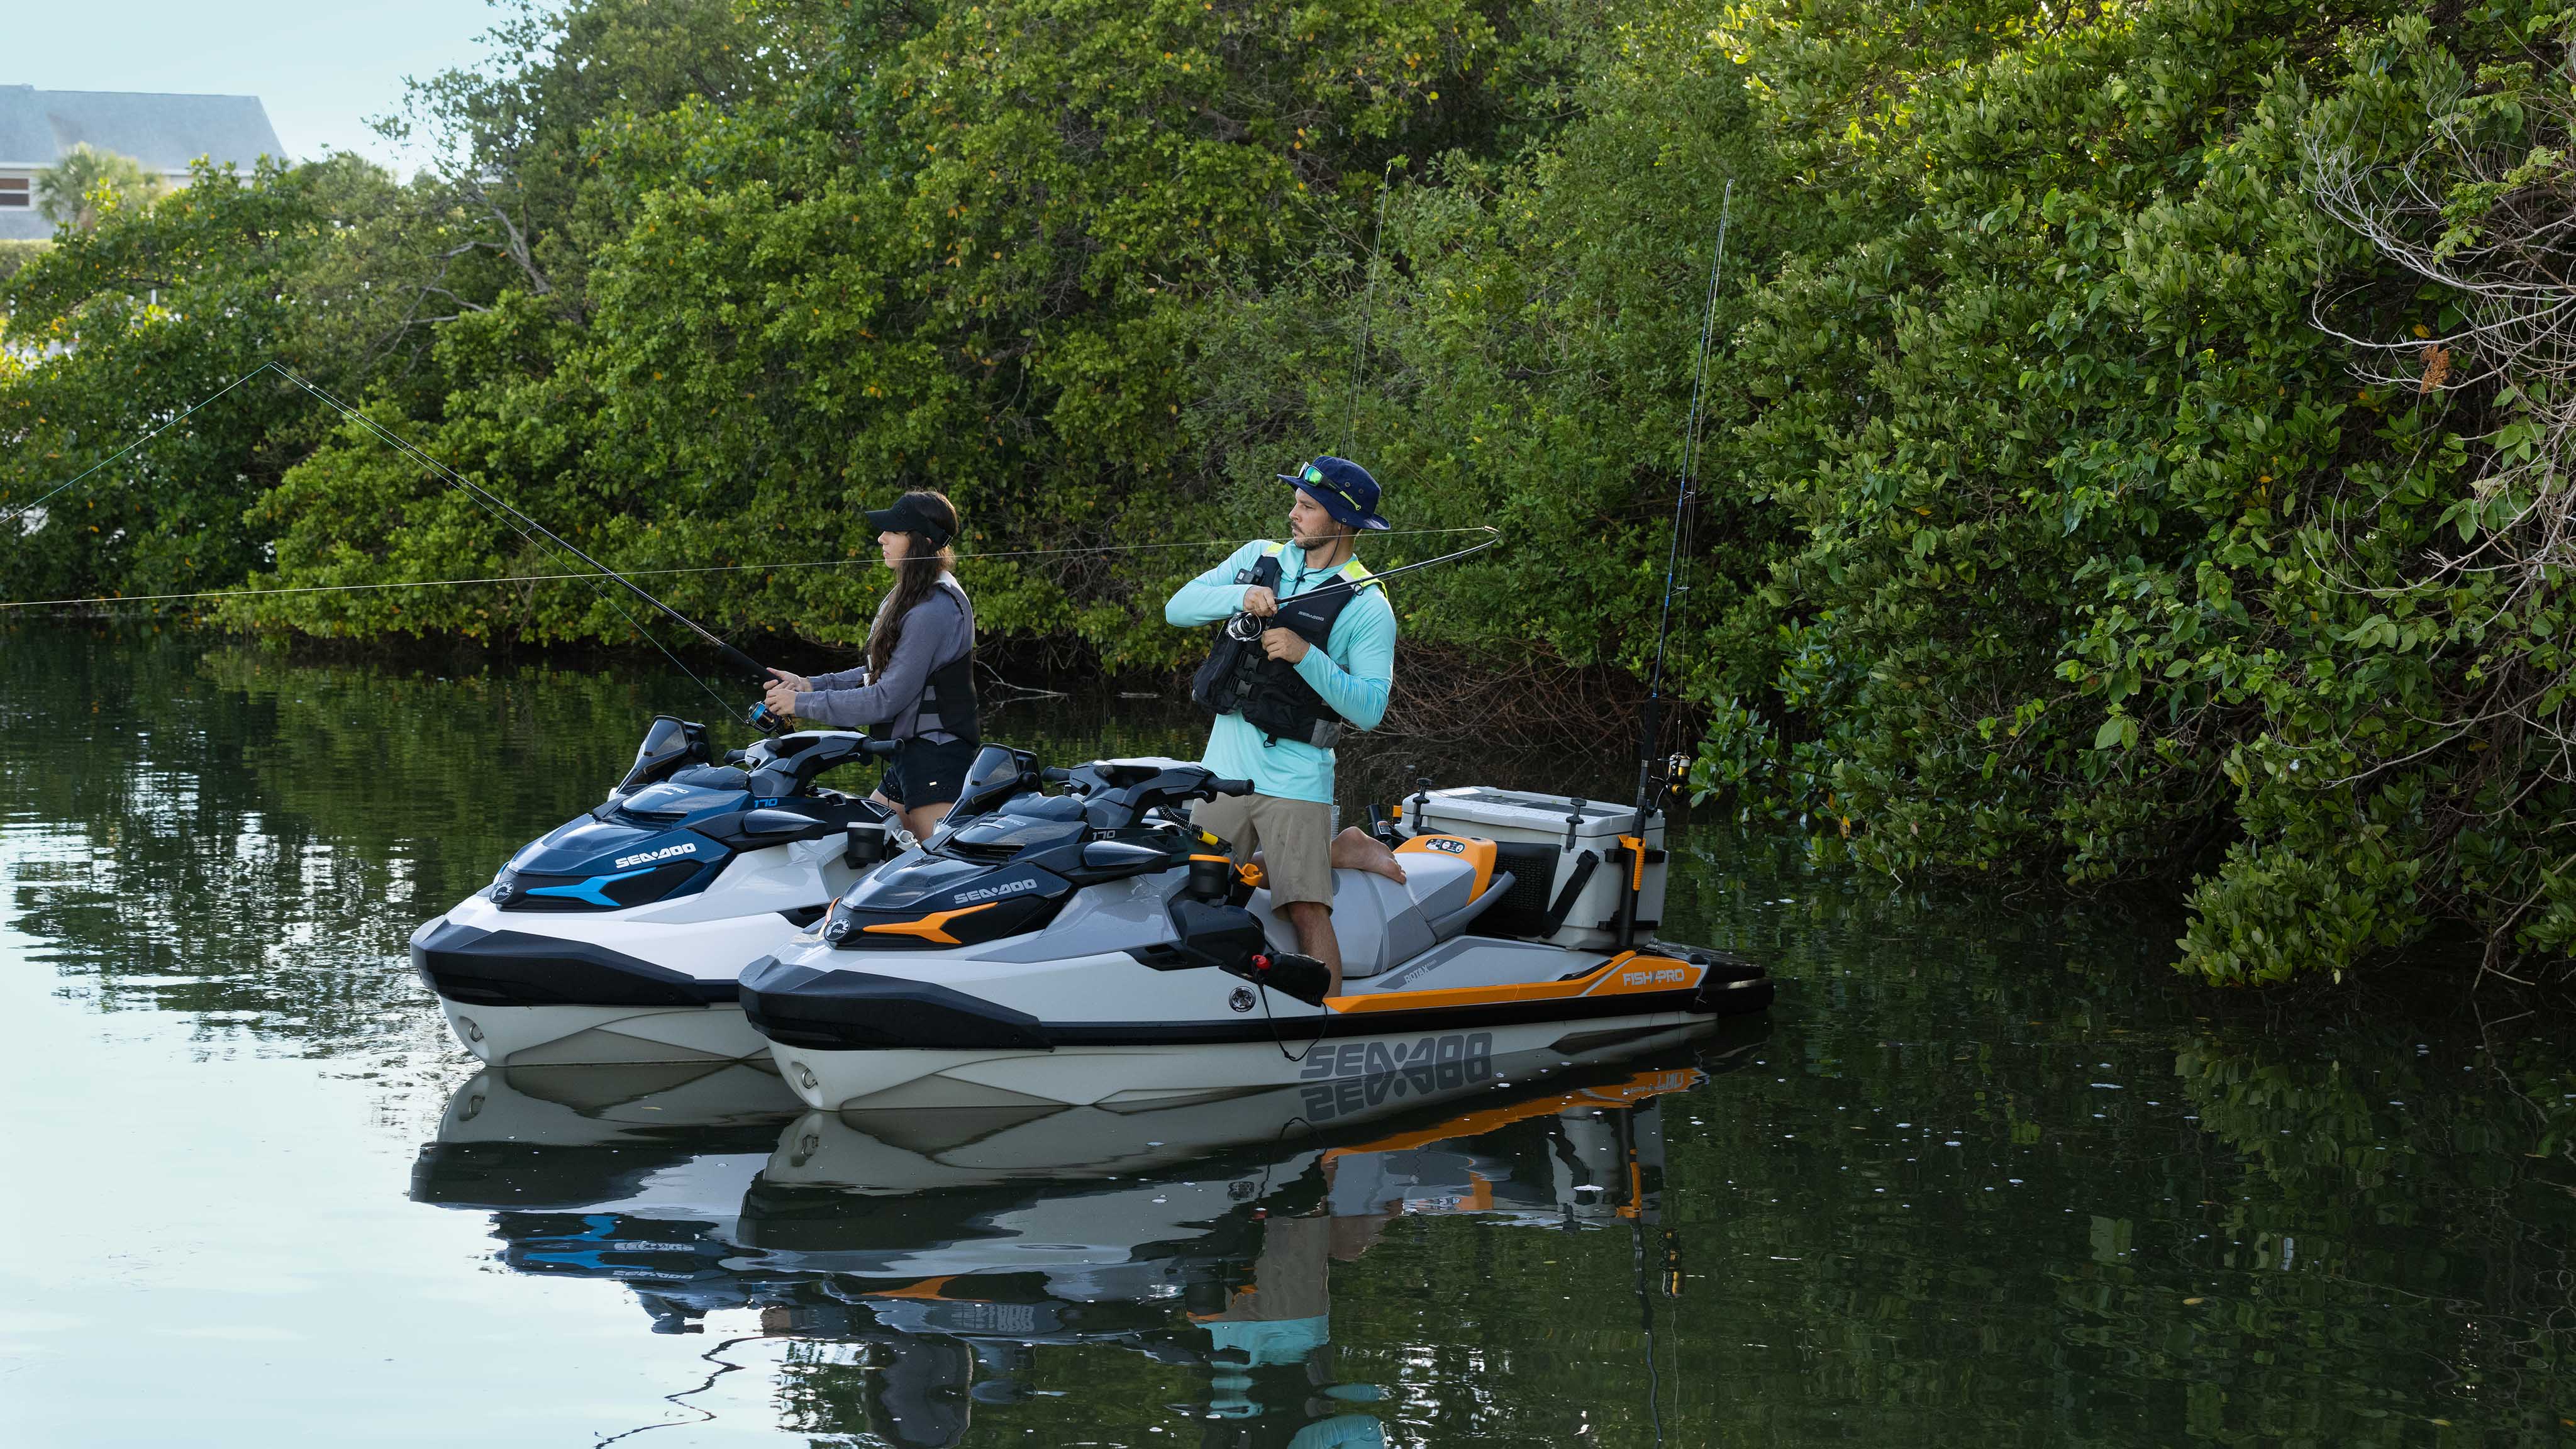 Fishing moment with 2 new Sea-Doo FishPro Trophy